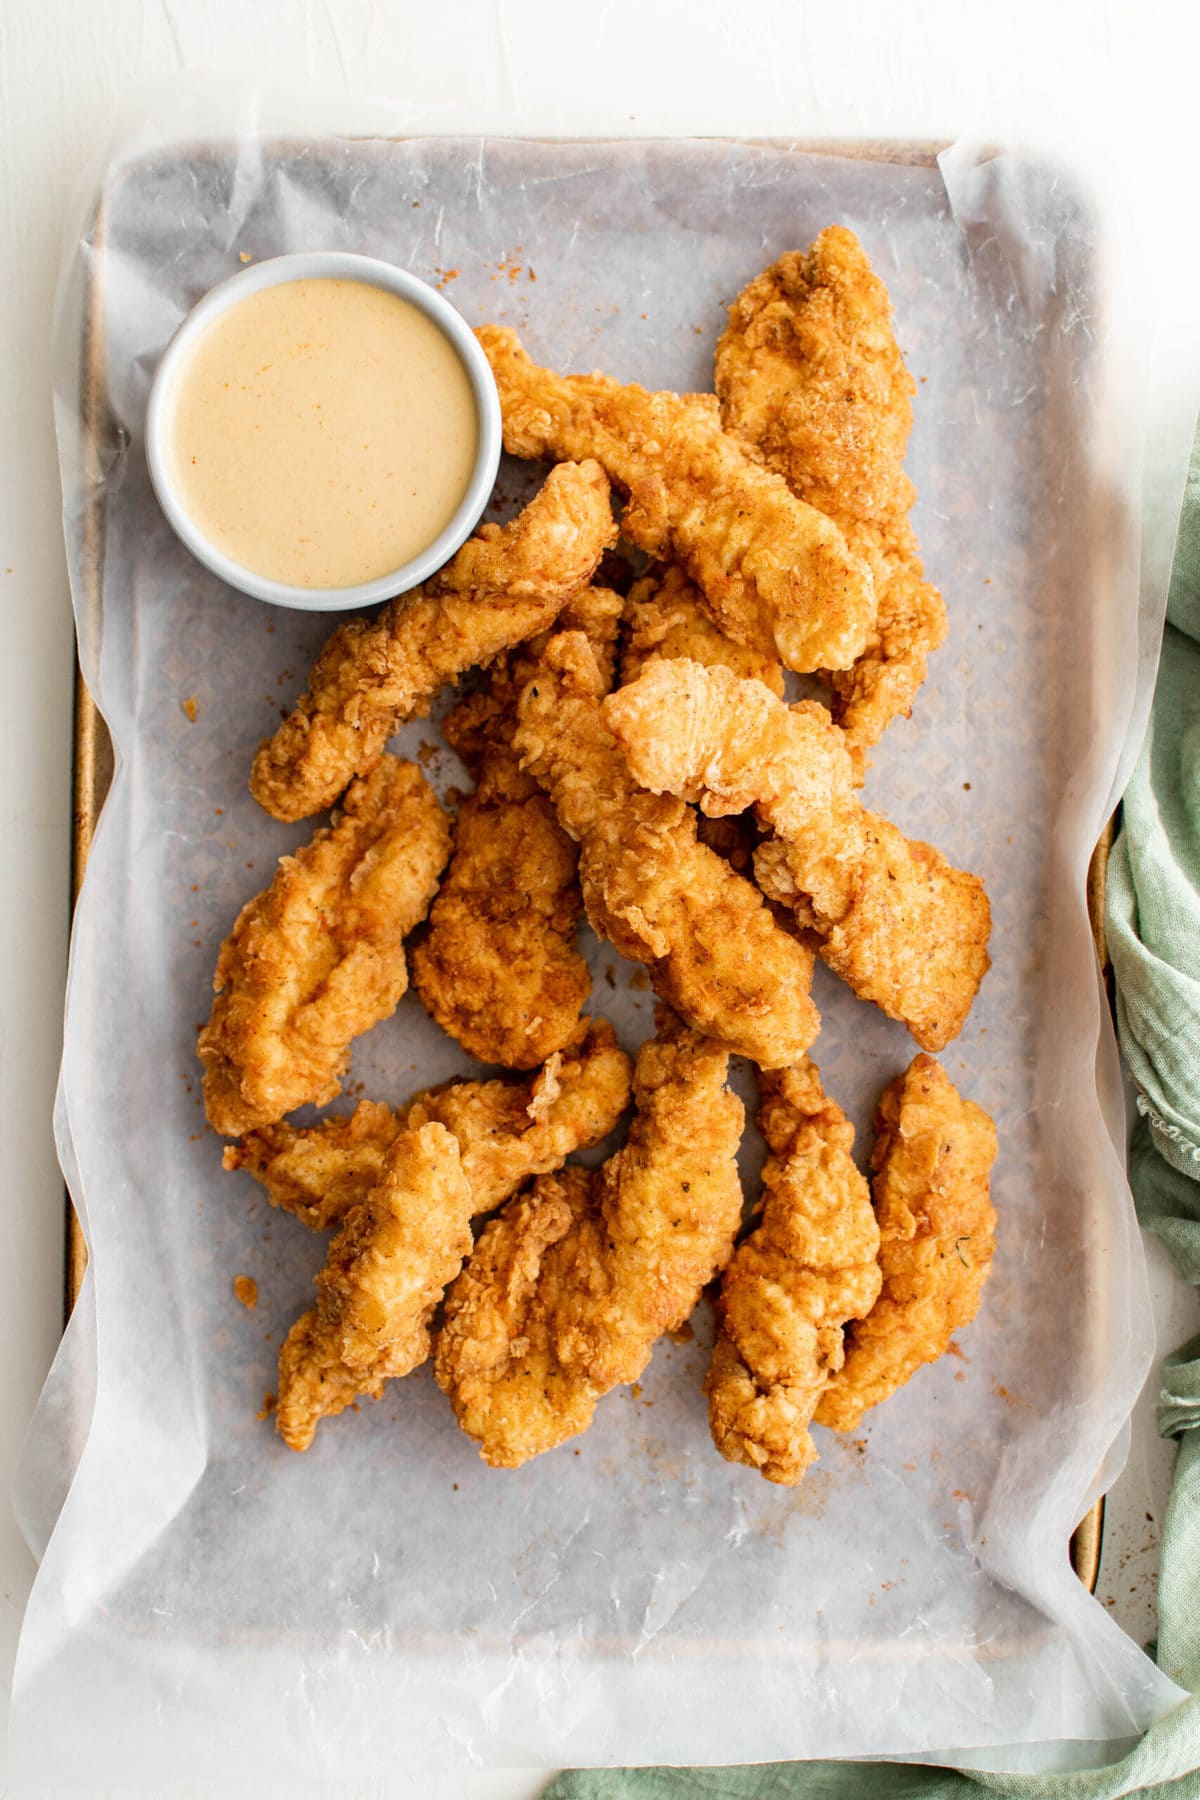 frie chicken tenders on paper lined tray, white dish with honey mustard dip